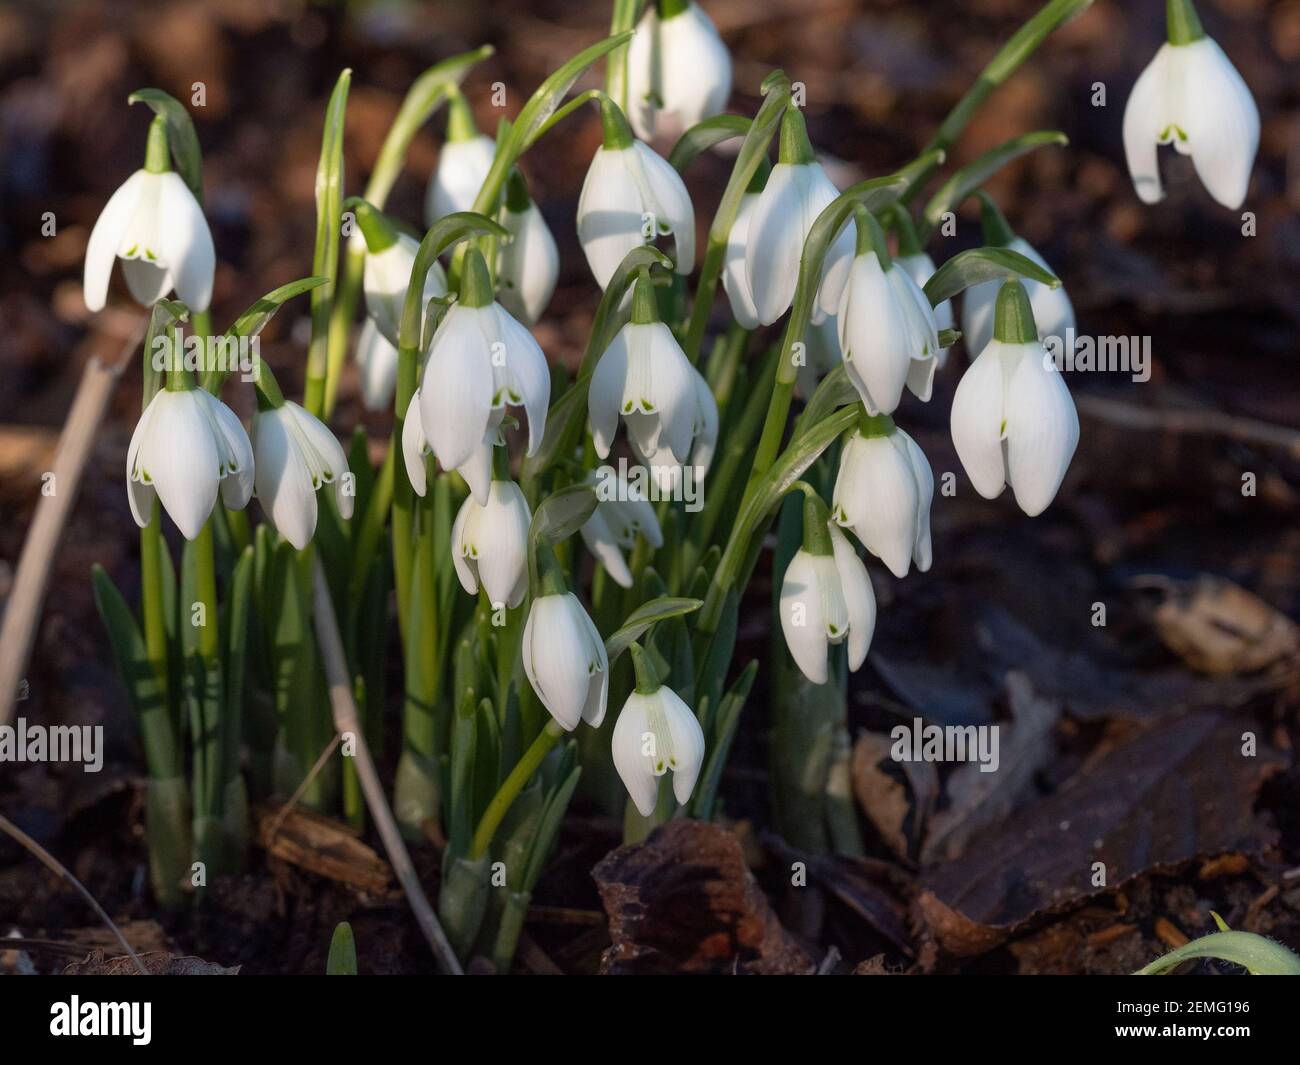 A single clump of snowdrop flowers and foliage in woodland Stock Photo